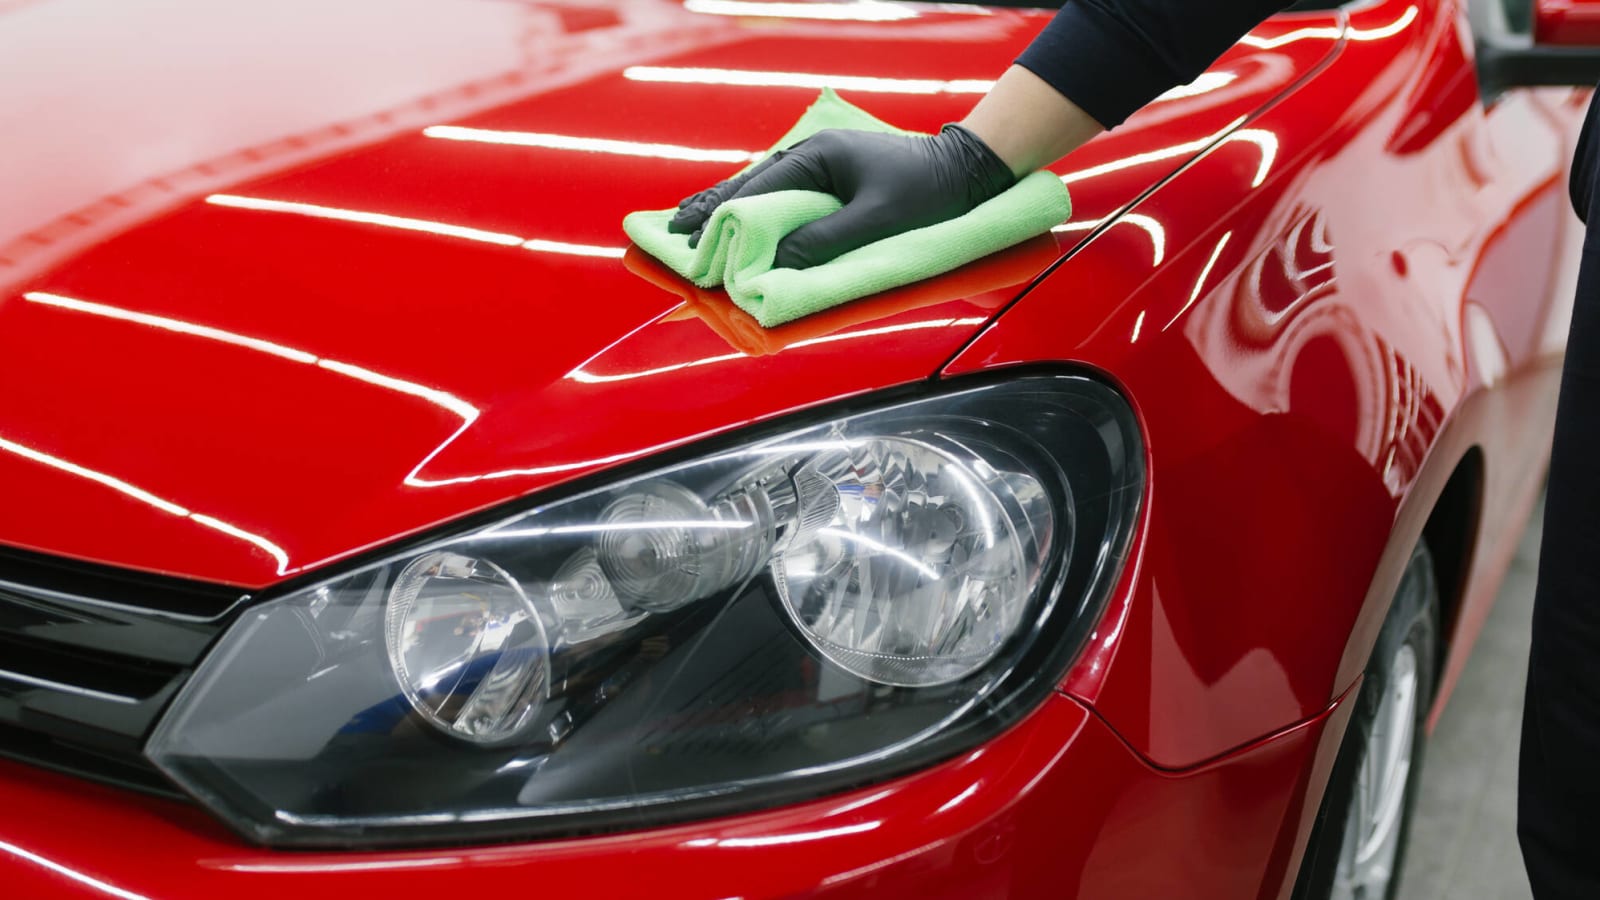 18 tips for keeping your car clean and organized